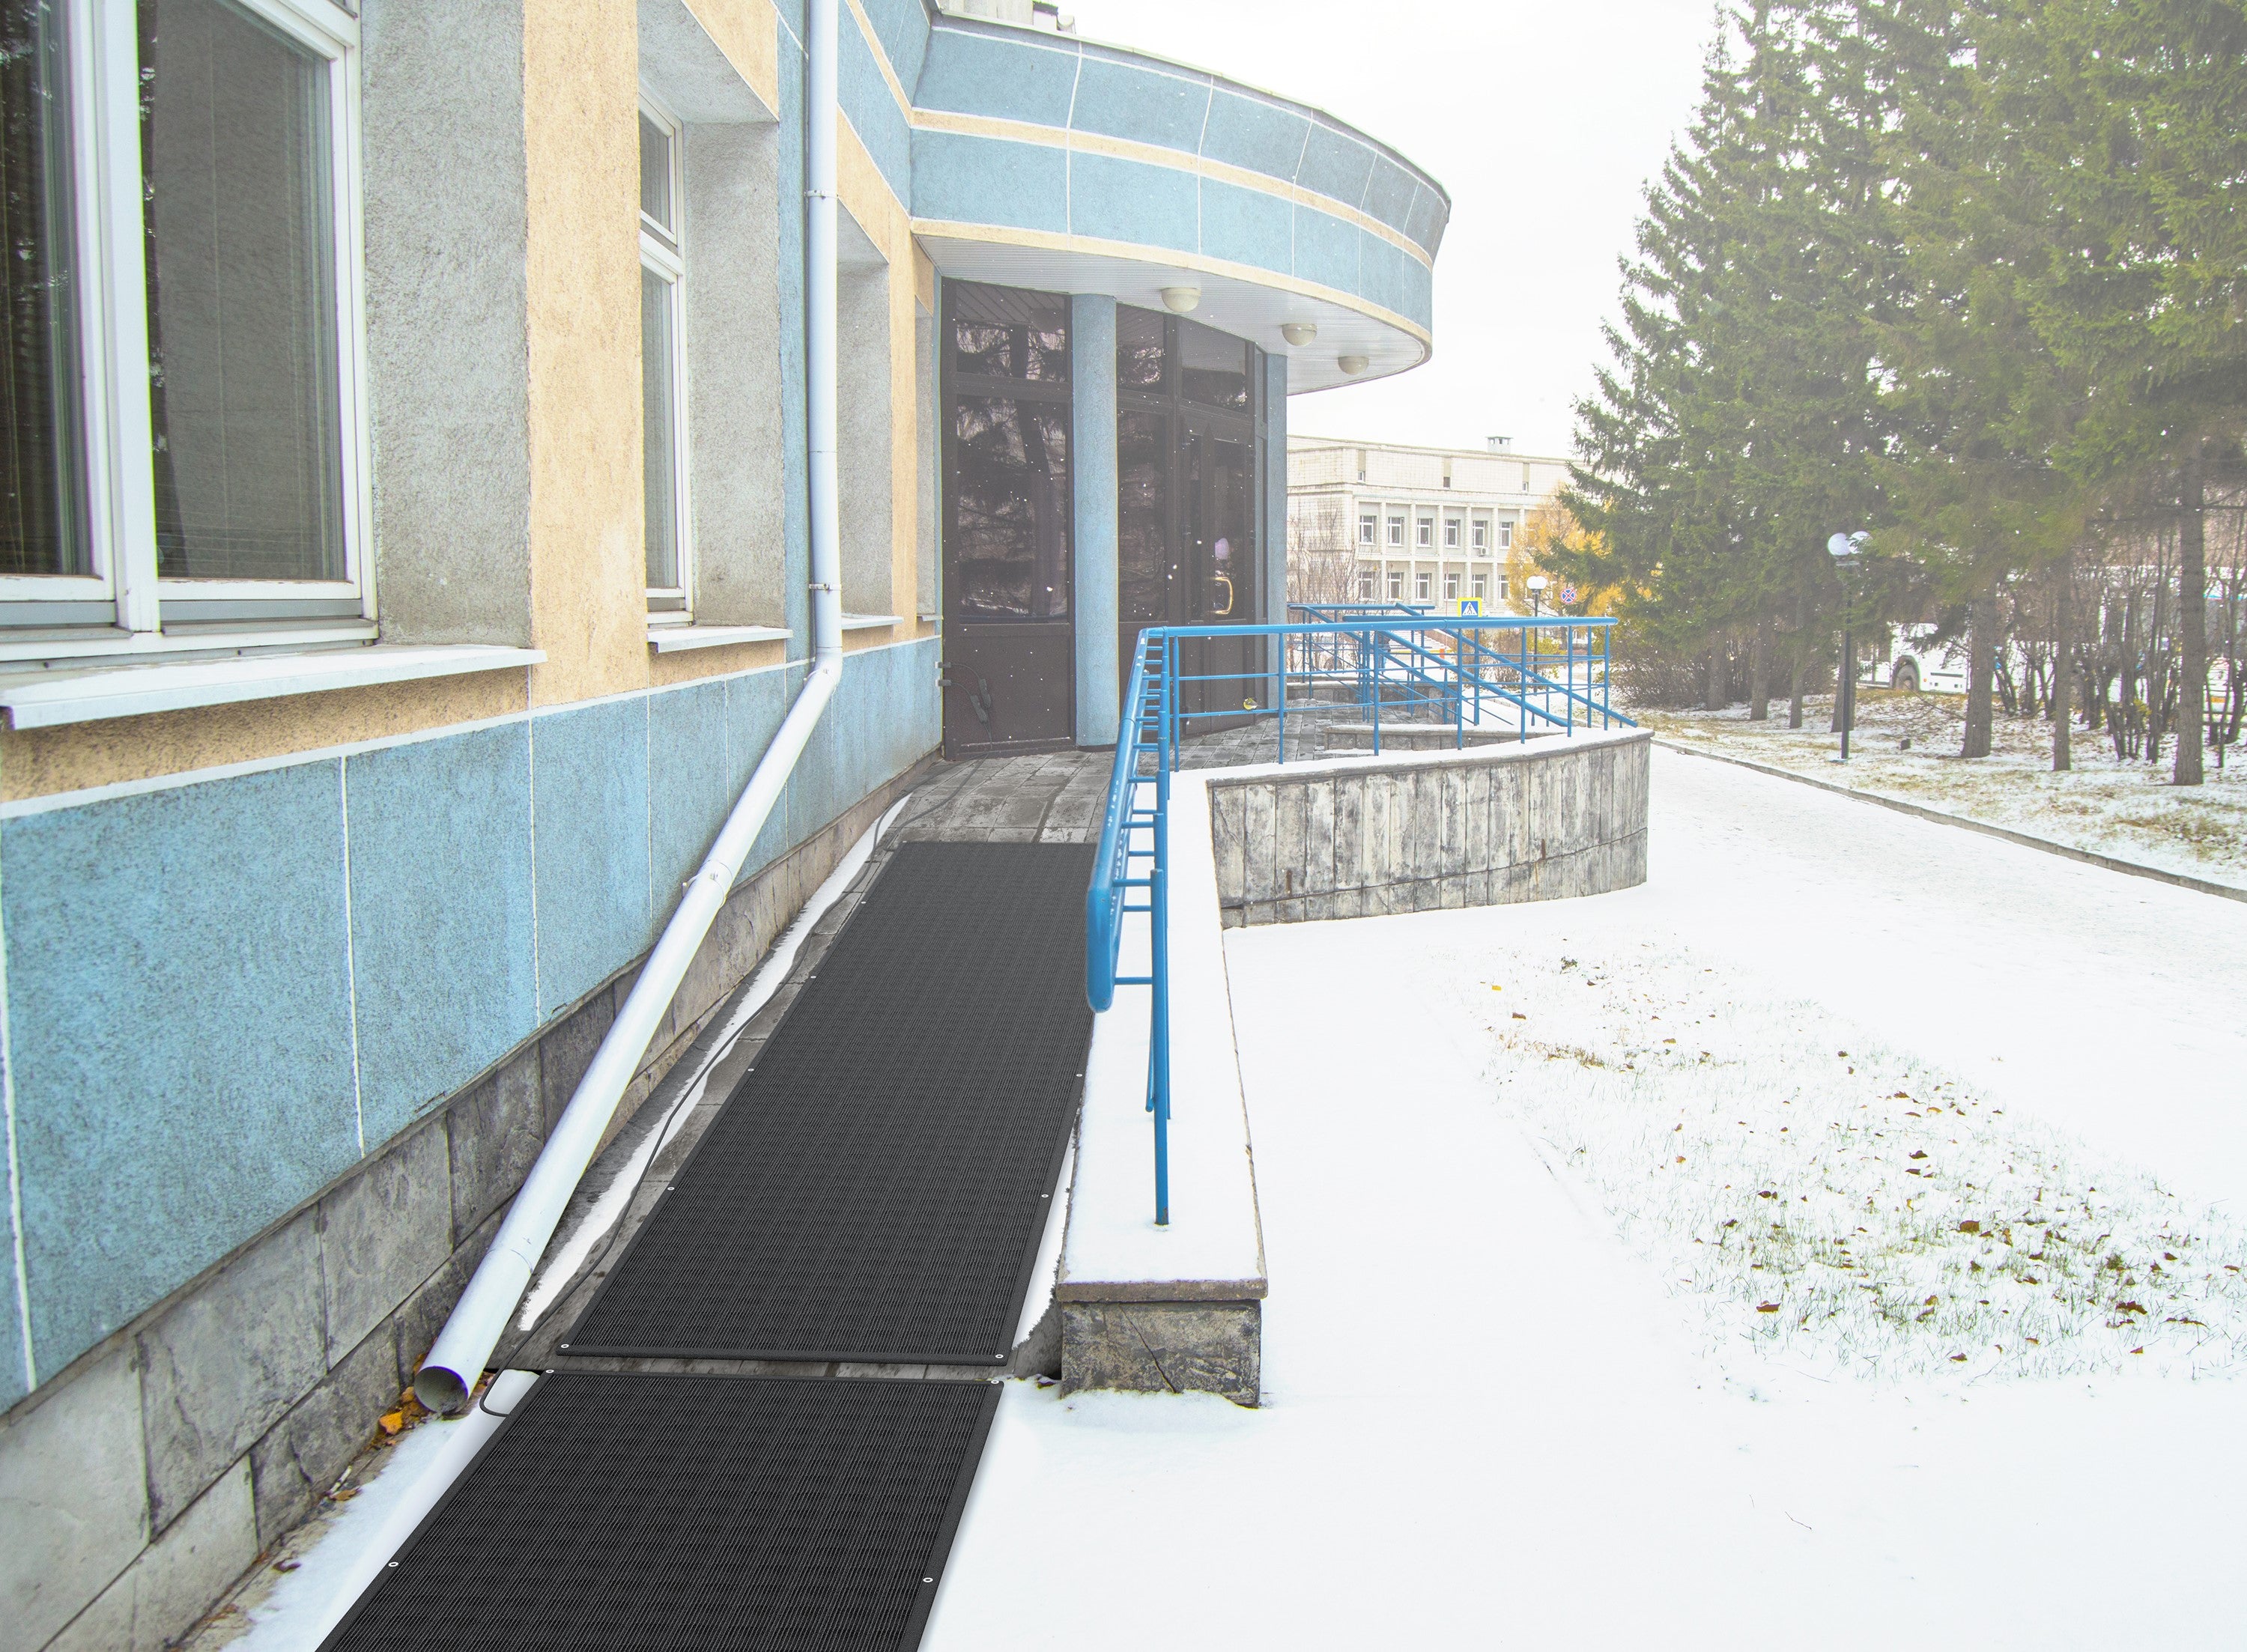 HeatTrak Heated Snow Melting Mats for Entrances - Heated Outdoor Mats - Electric Snow Melting Mats for Winter Snow Removal - Trusted Snow and Ice